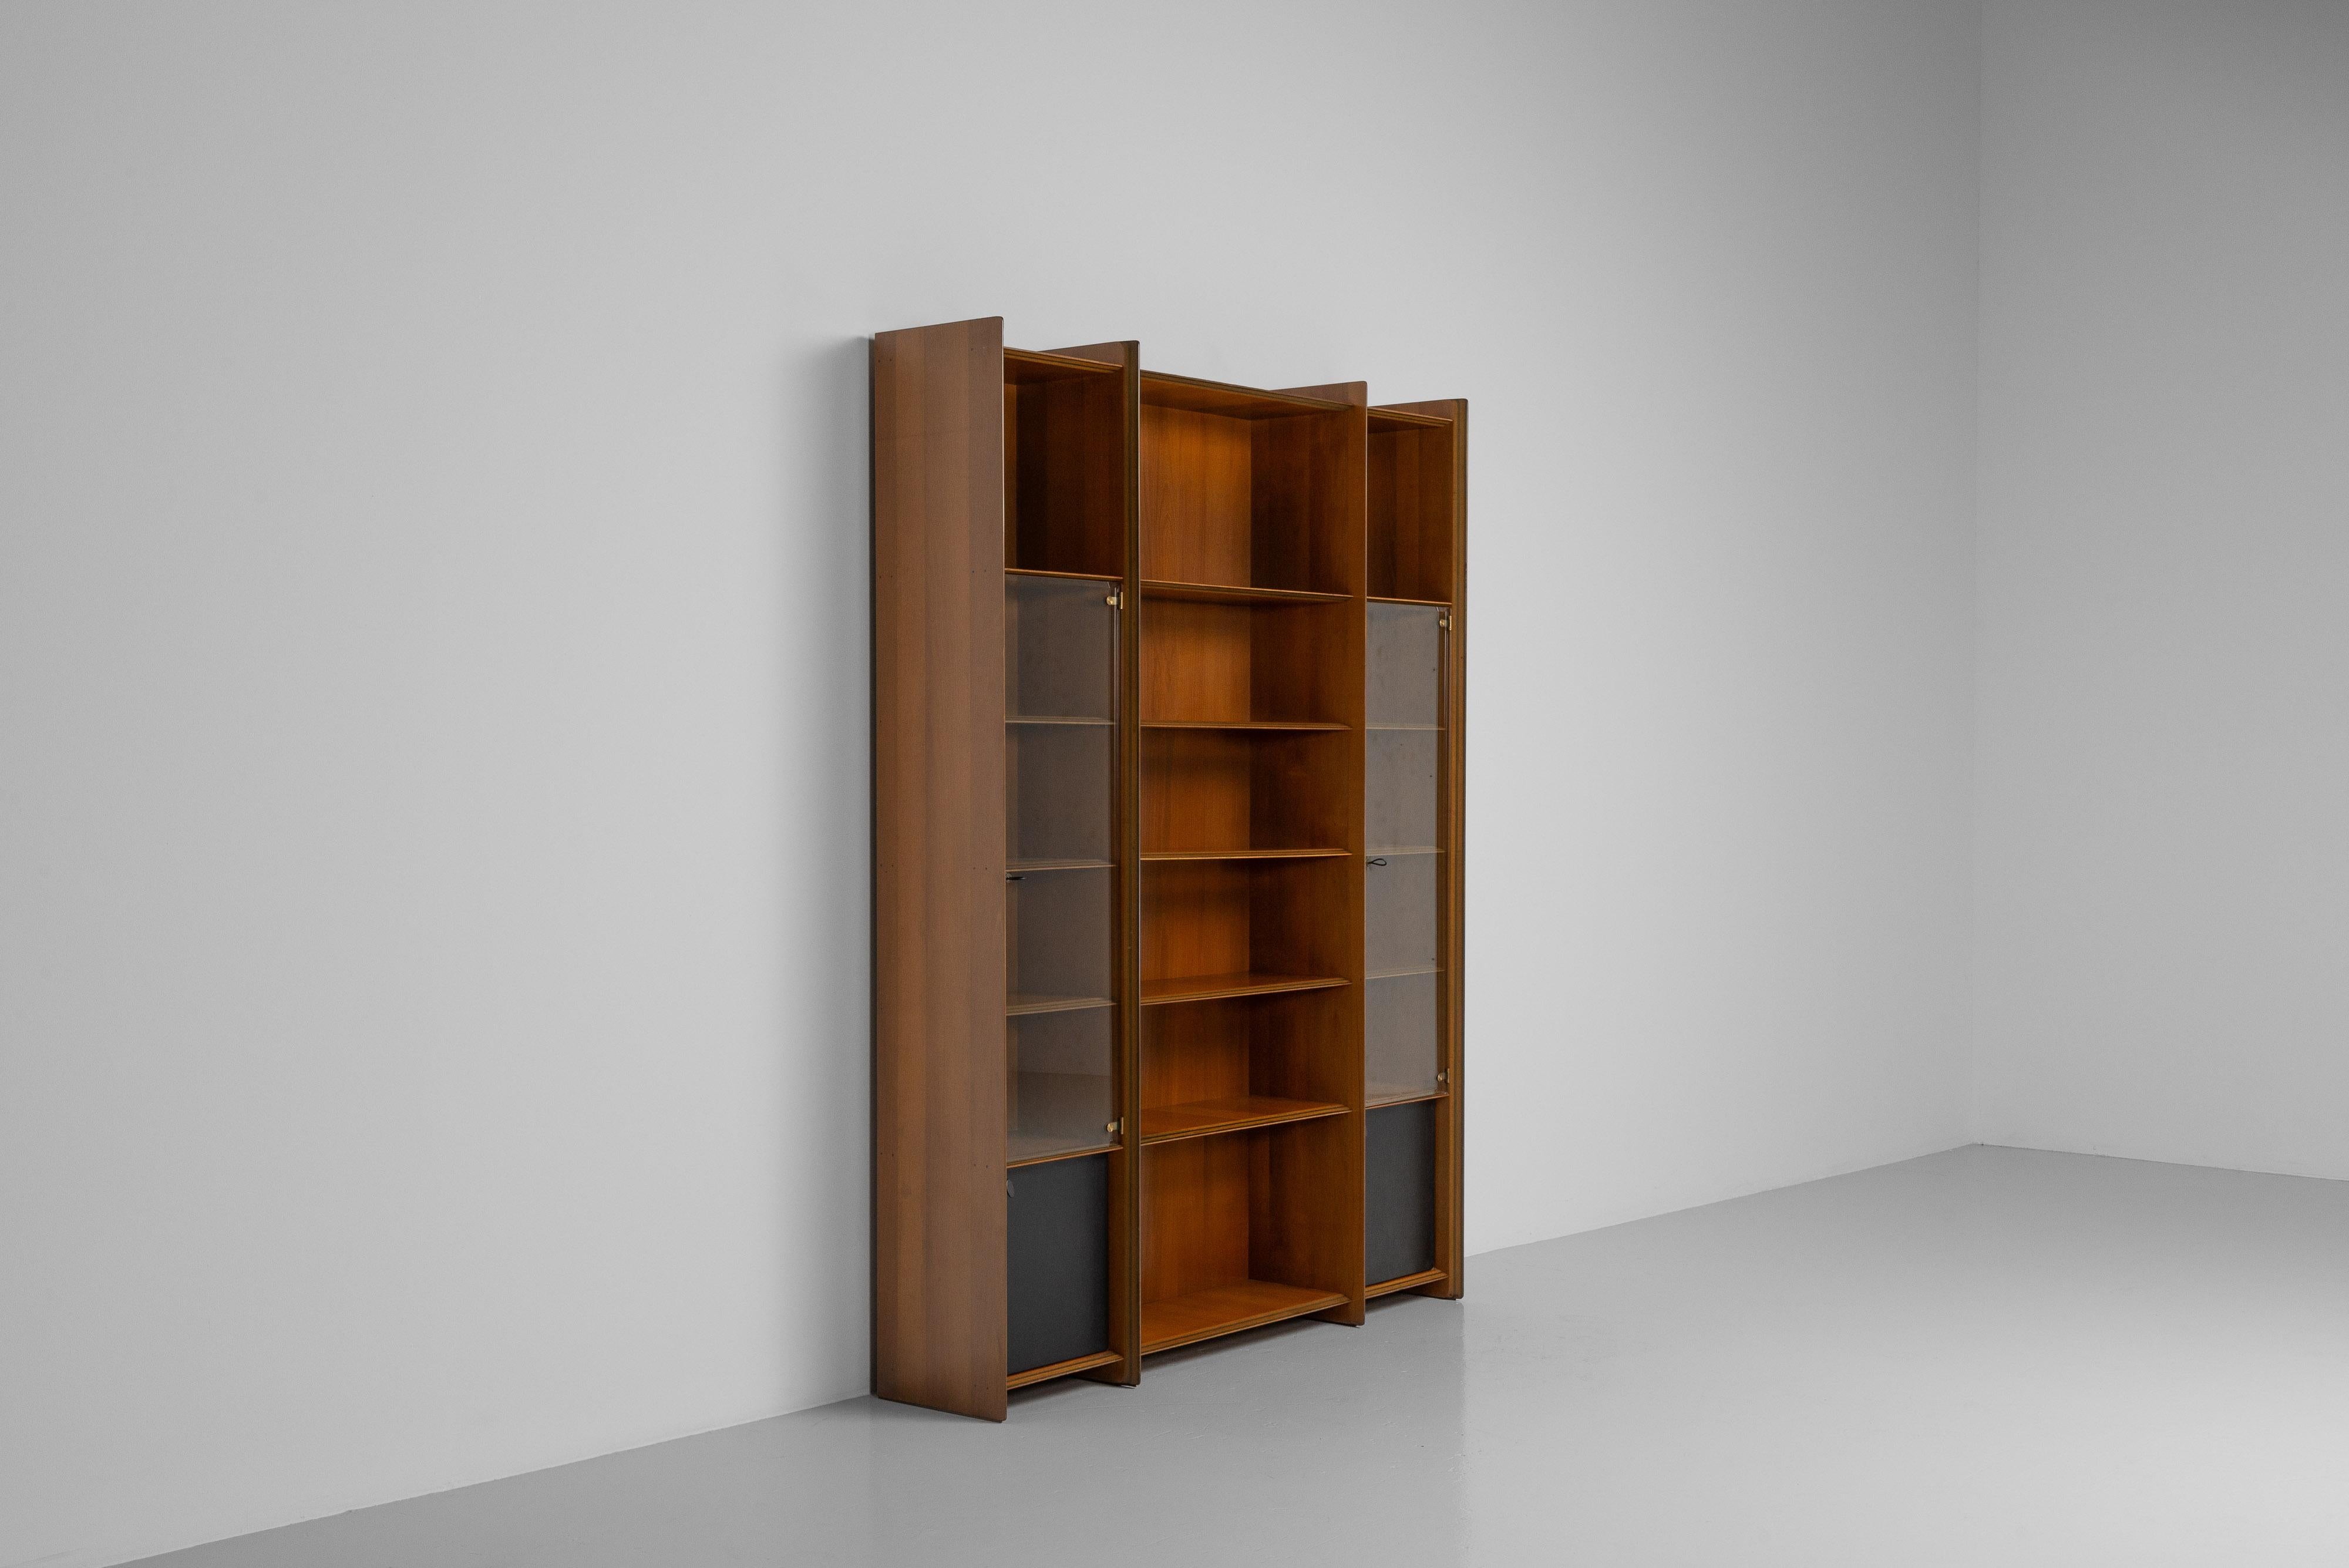 Afra e Tobia Scarpa Artona bookcase Italy 1975 In Good Condition For Sale In Roosendaal, Noord Brabant